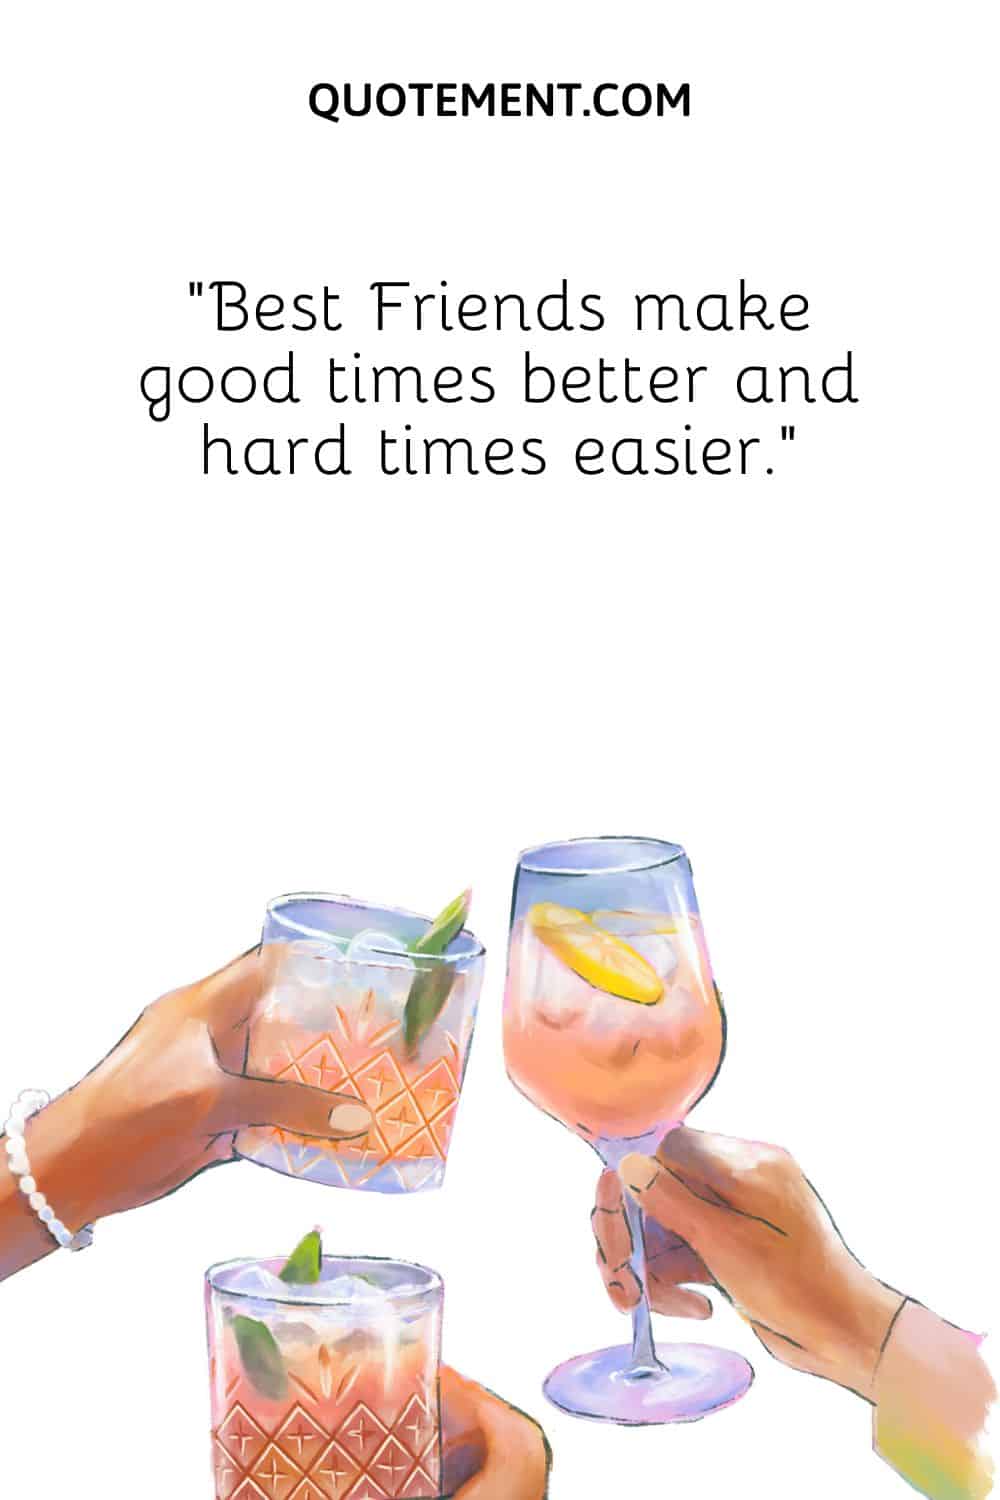 “Best Friends make good times better and hard times easier.”